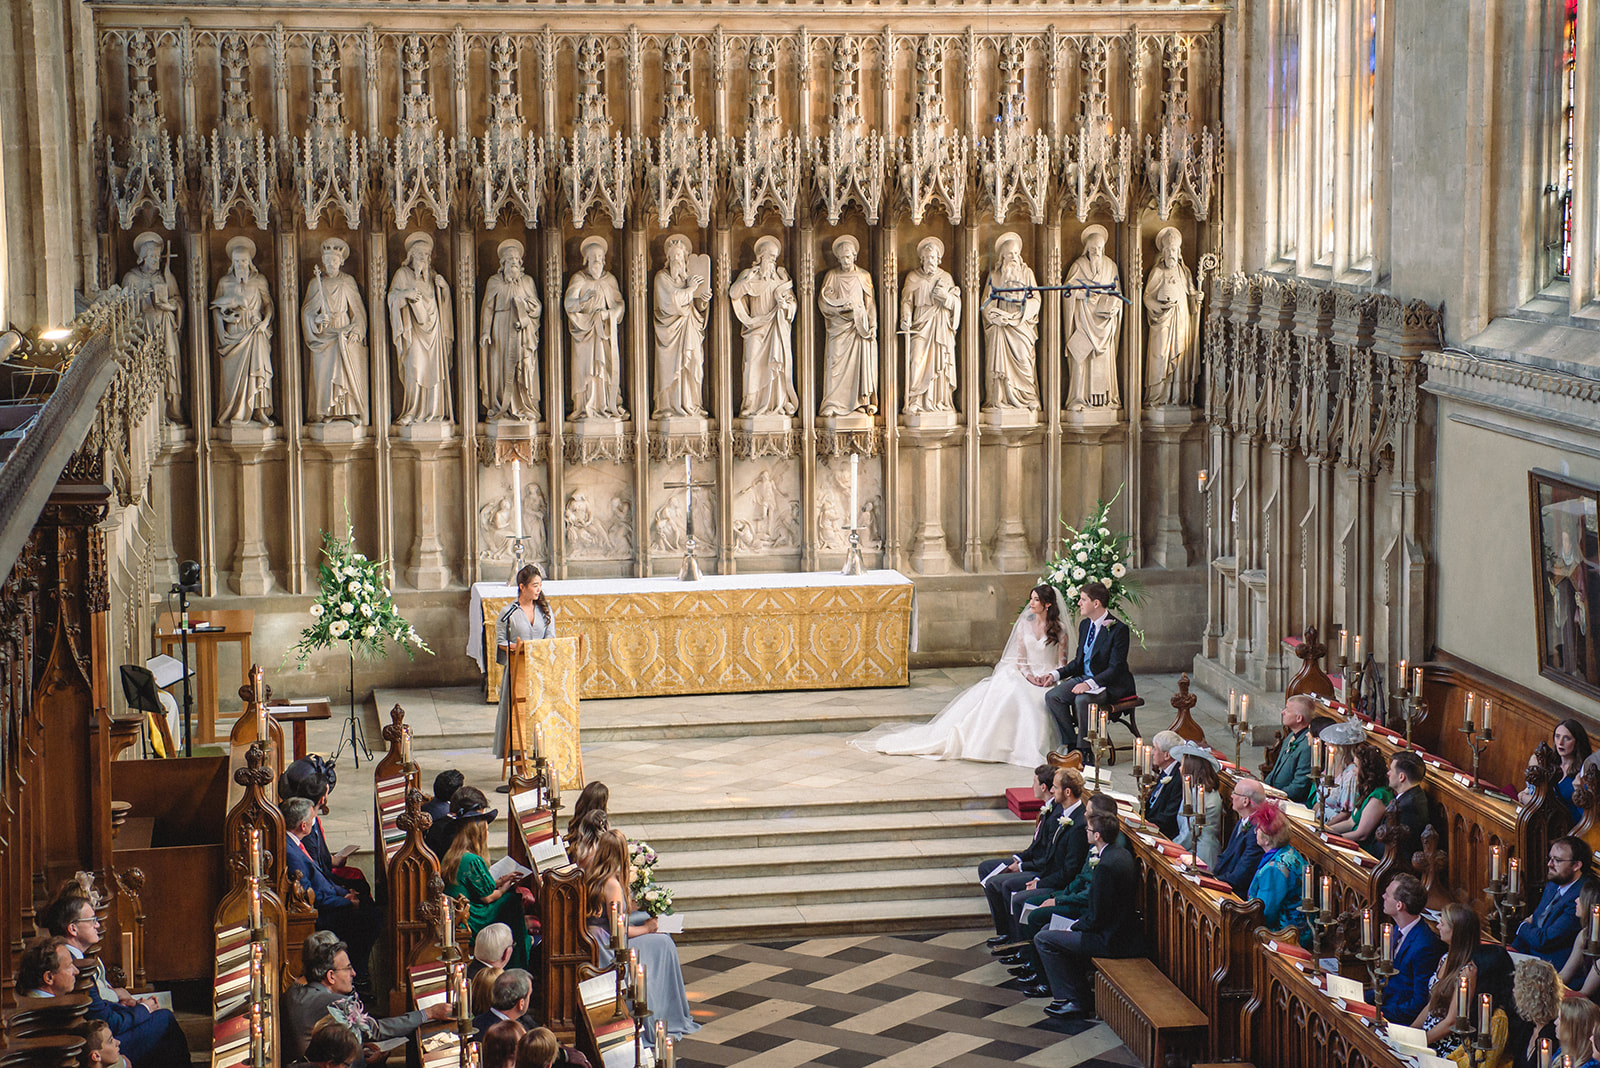 Katherine and Damien's wedding ceremony at the New College Chapel